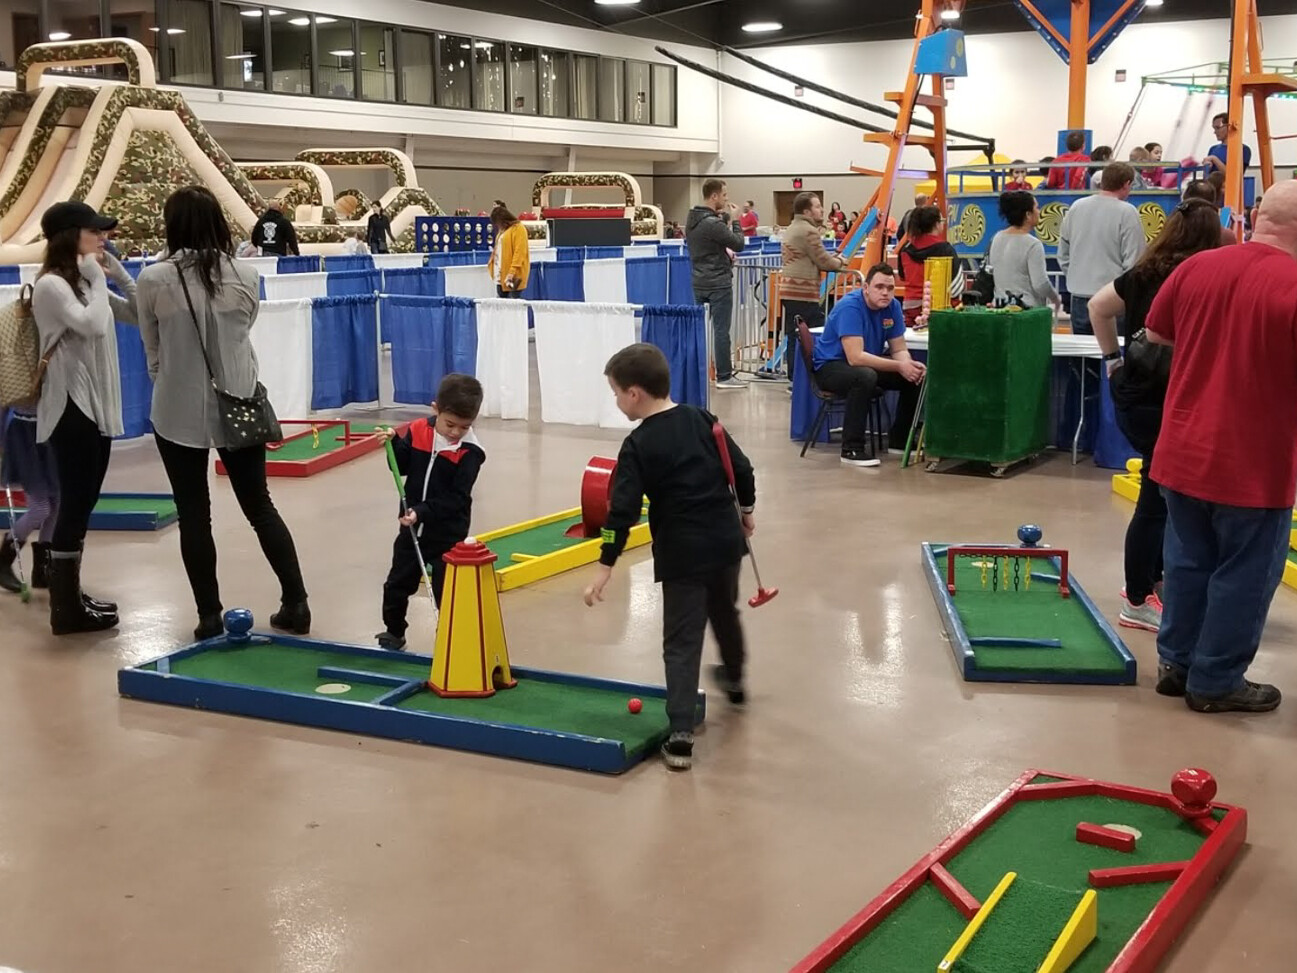 Kids and adults playing mini golf at the family fun fest in Chicago.